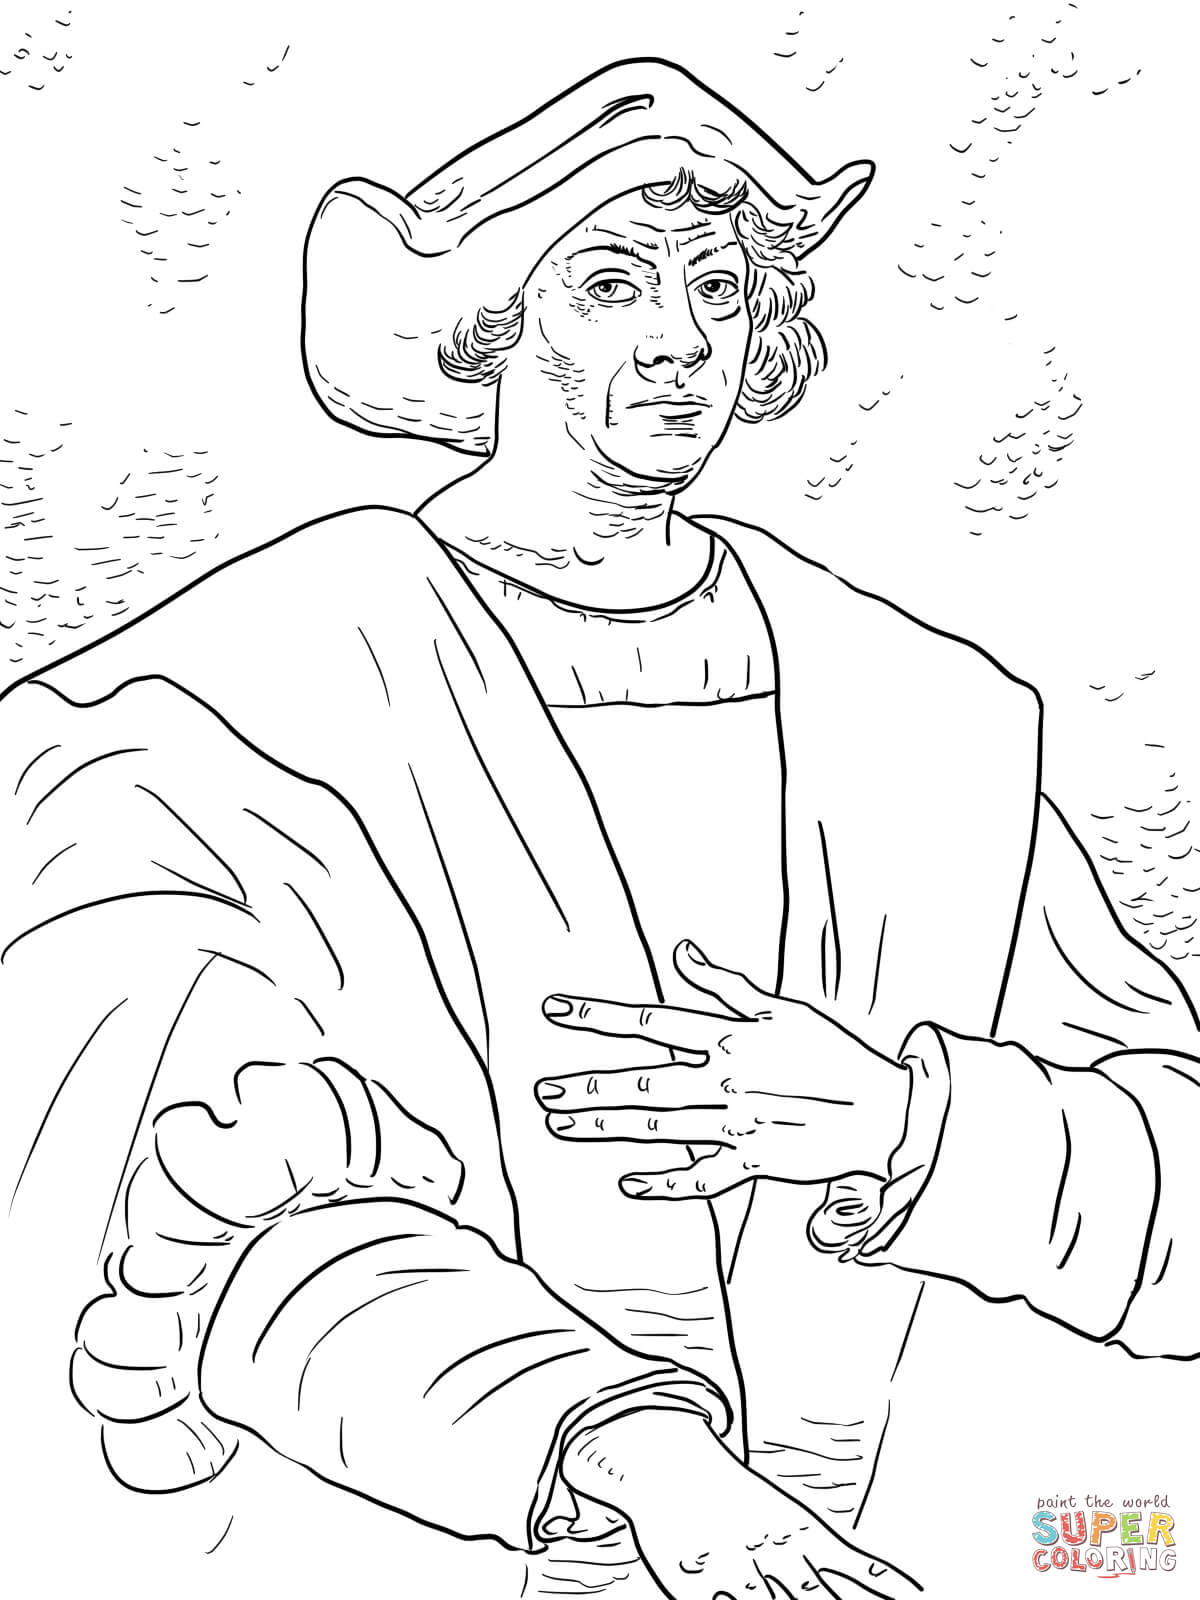 Columbus Ships Coloring Pages Ships Of Columbus Coloring Page Free Printable Coloring Pages